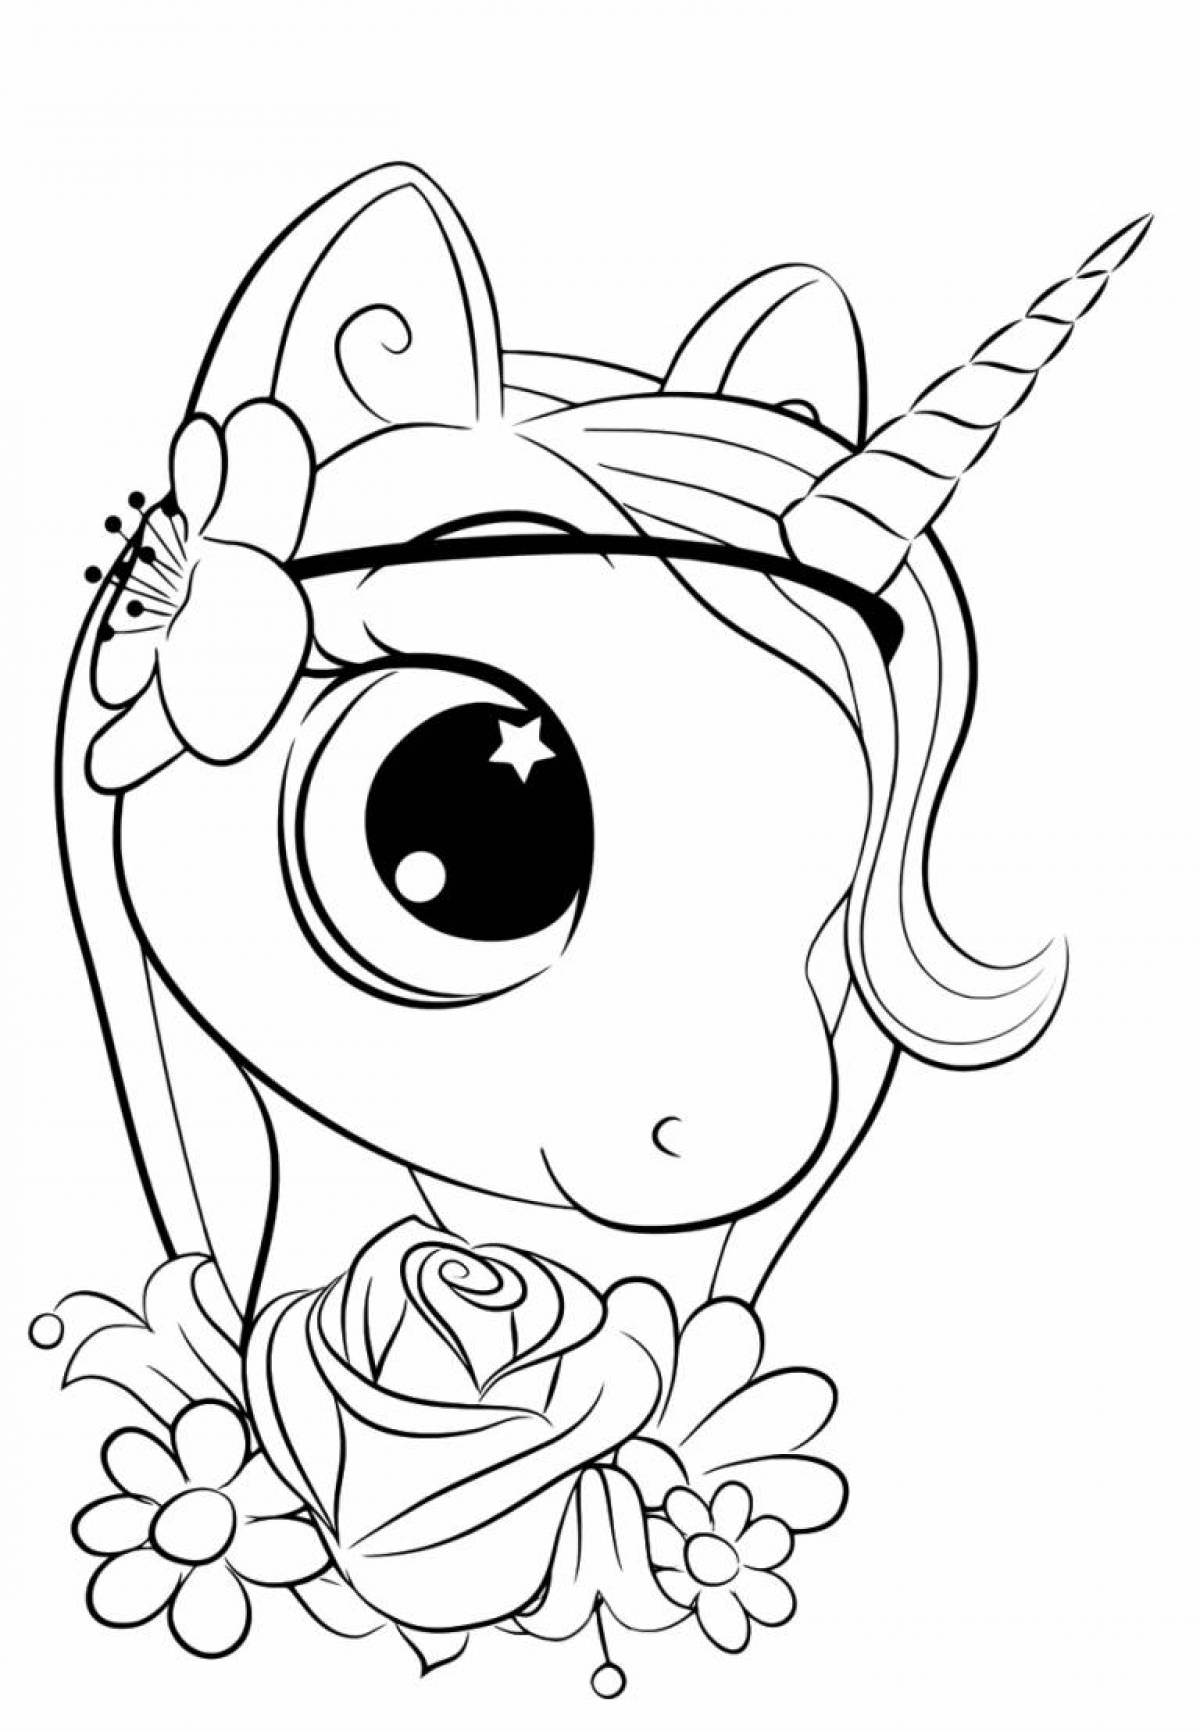 Coloring page dazzling unicorn